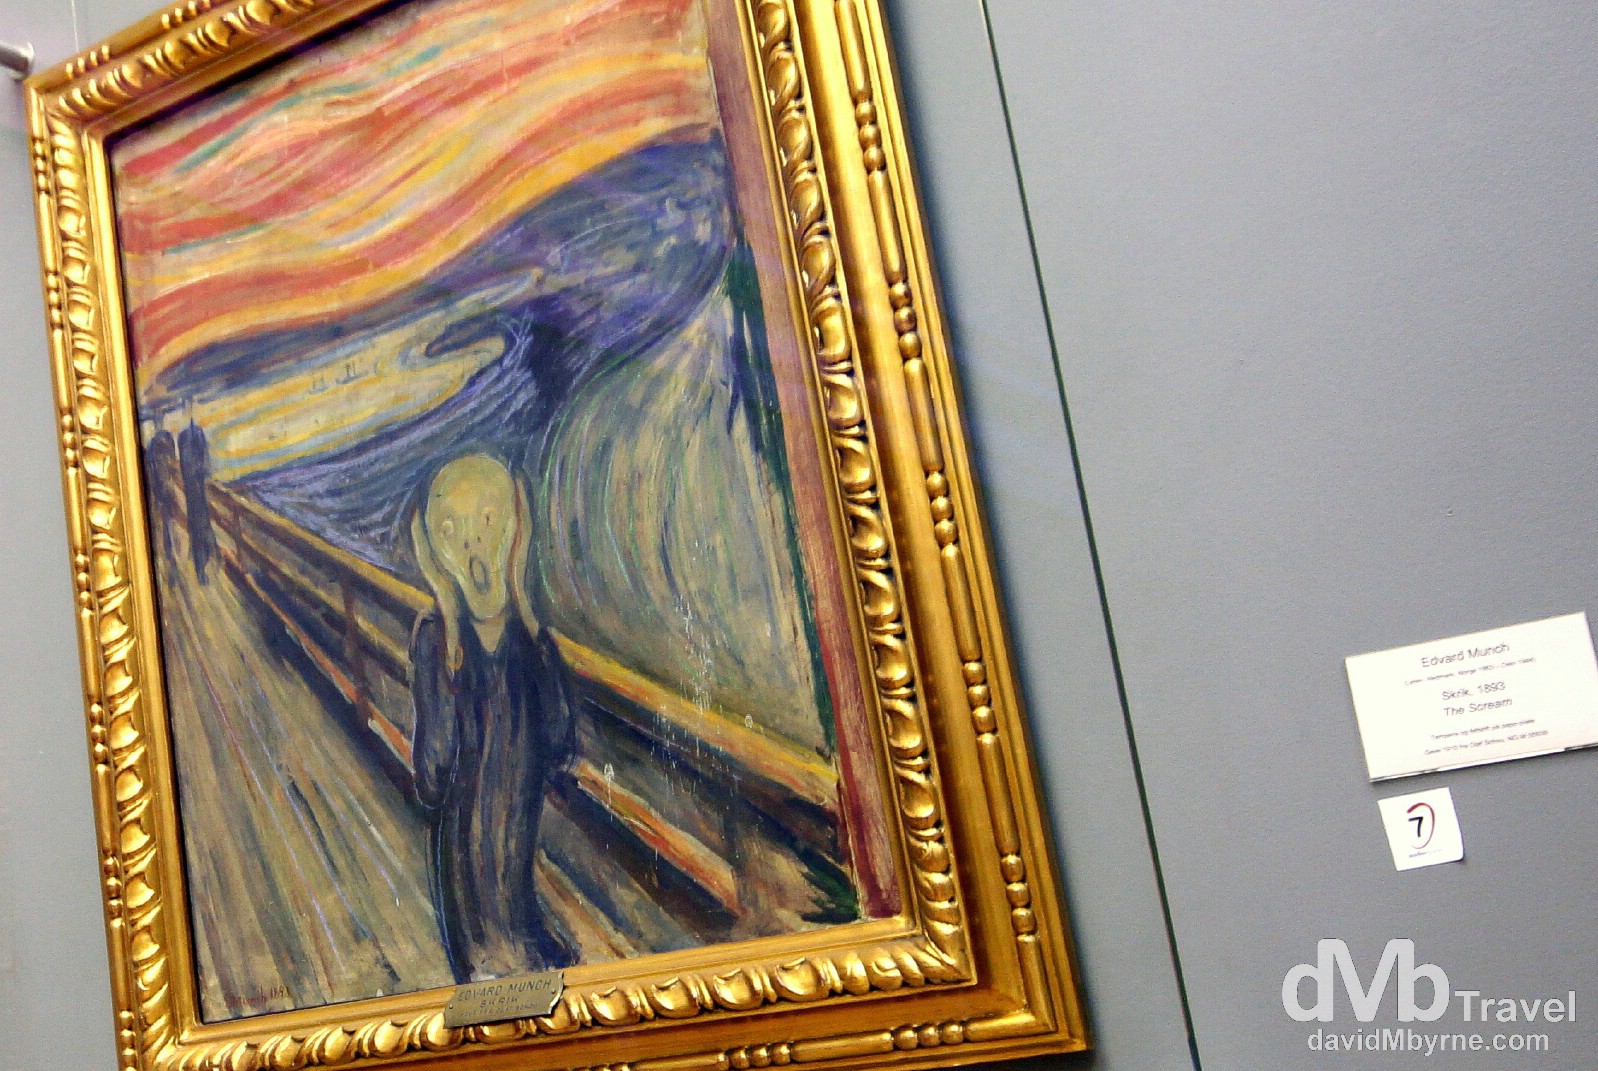 The Scream by Edward Munch hanging in the National Gallery, Oslo, Norway. November 29th 2012. 